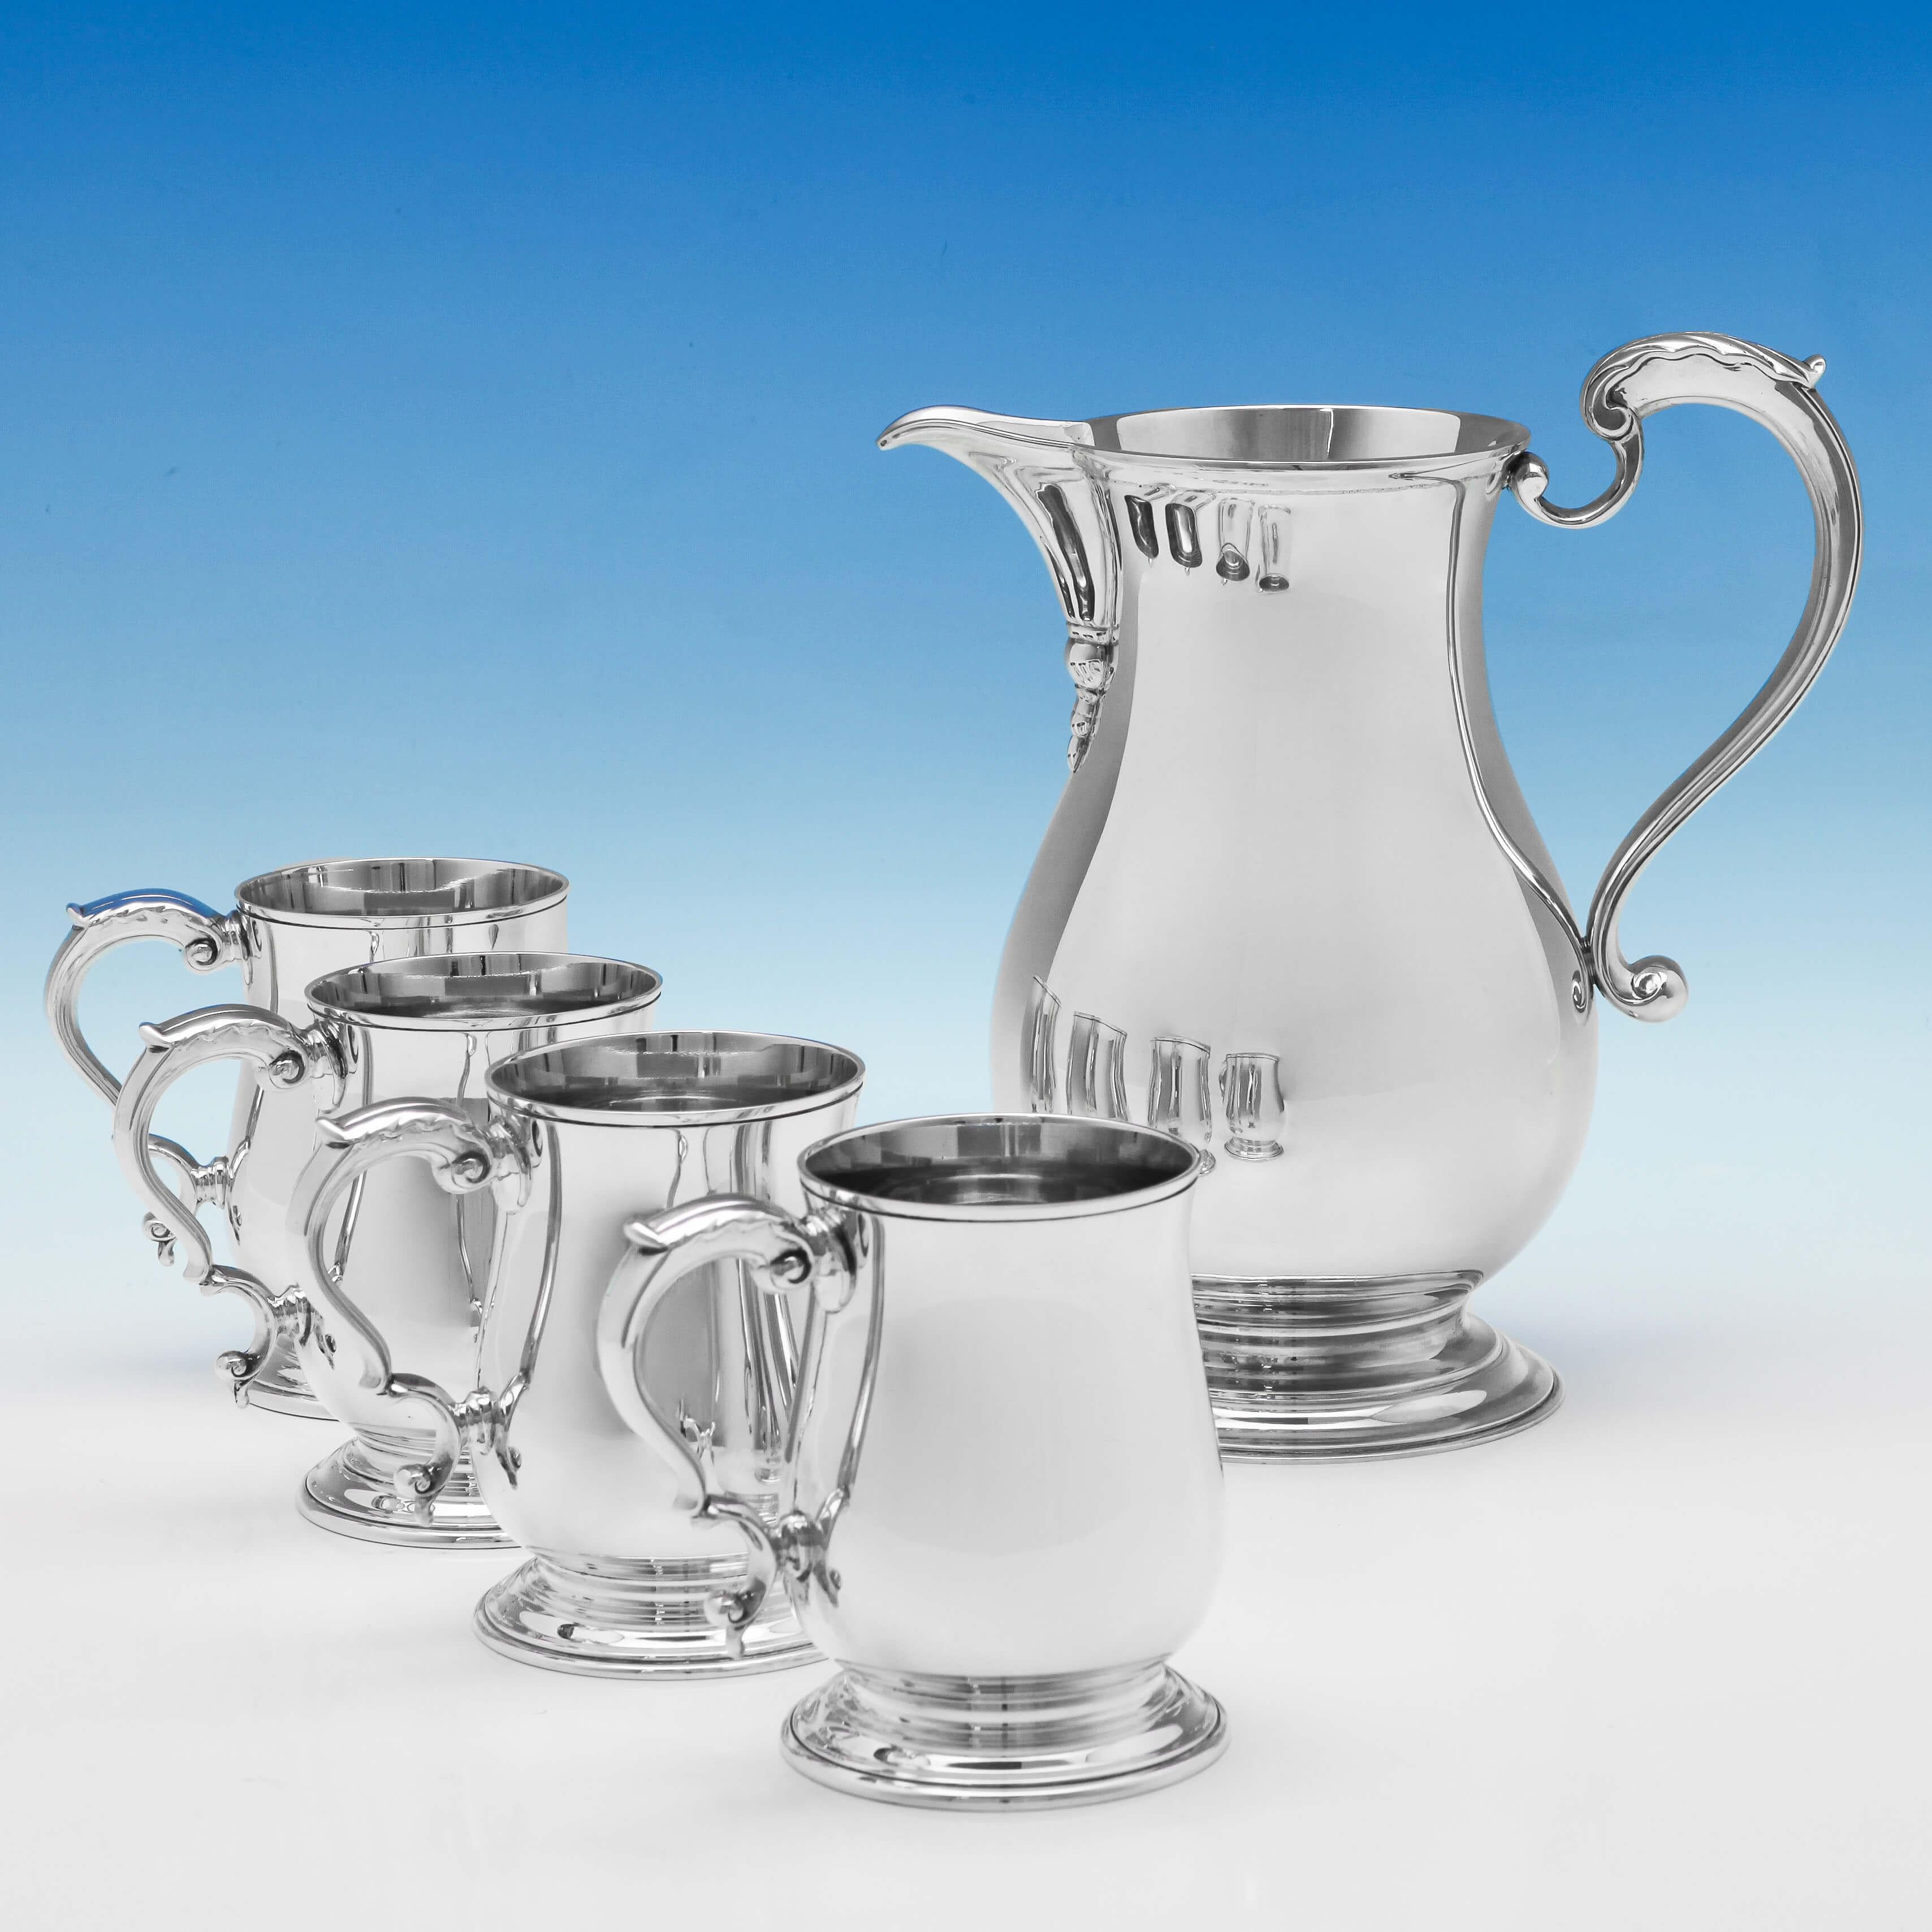 Hallmarked in London in 1962 by C. J. Vander, this handsome, Sterling Silver Beer Jug and set of Four Mugs are plain in style featuring reed borders and acanthus top scroll handles. The water jug measures 8.25 inches (21cm) tall, by 7.5 inches